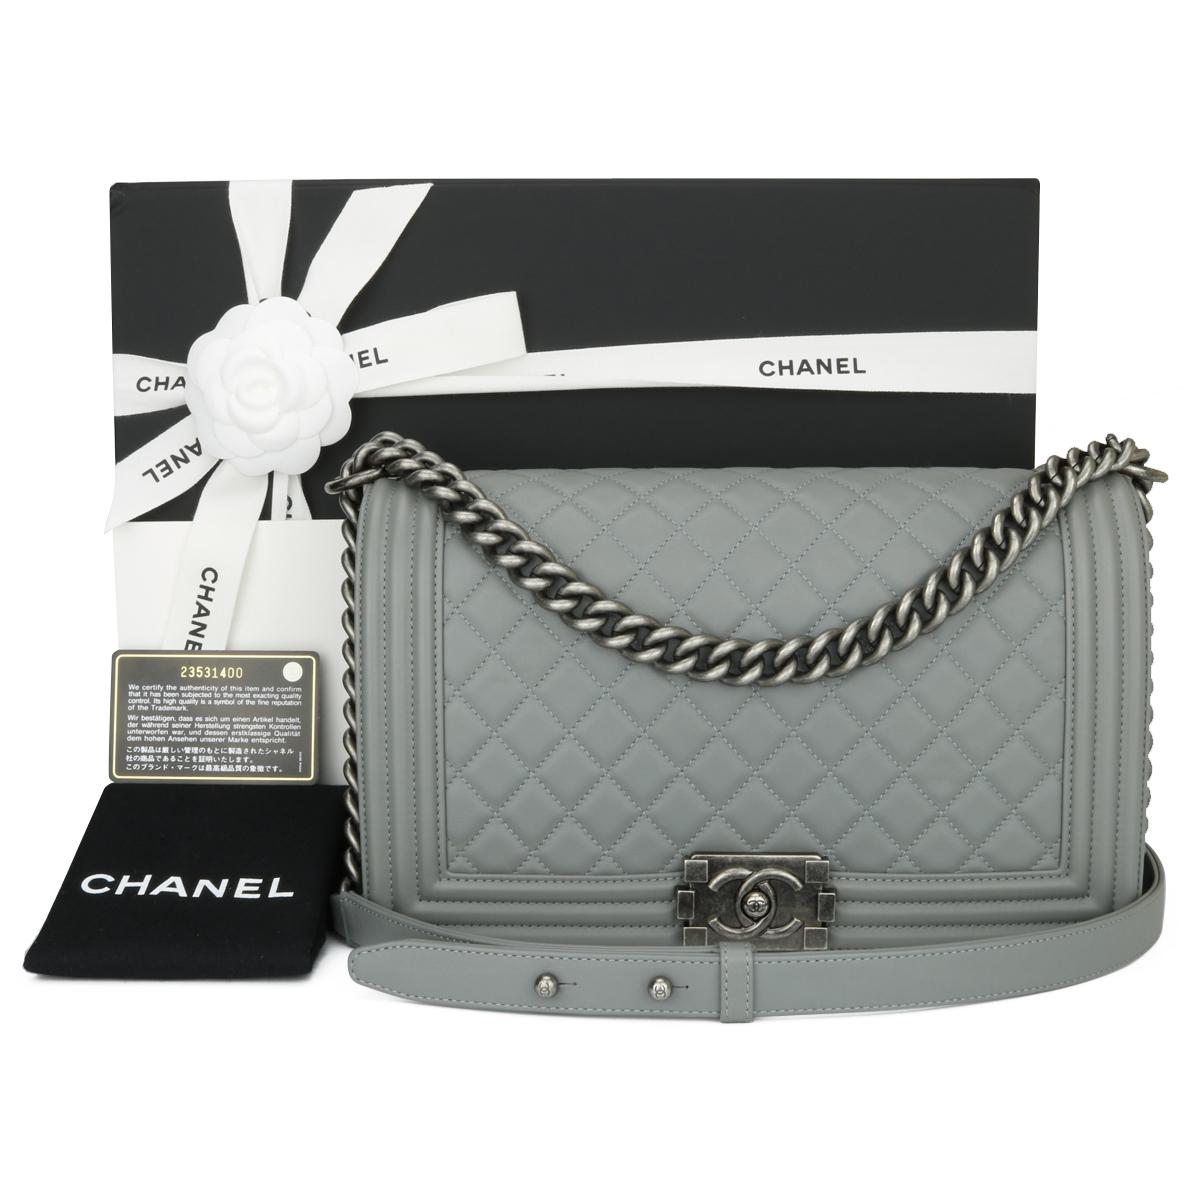 CHANEL New Medium Quilted Boy Bag Grey Calfskin with Ruthenium Hardware 2017.

This stunning bag is still in mint condition, the bag still holds its original shape and the hardware is still very clean and shiny. A truly unique combination and sold